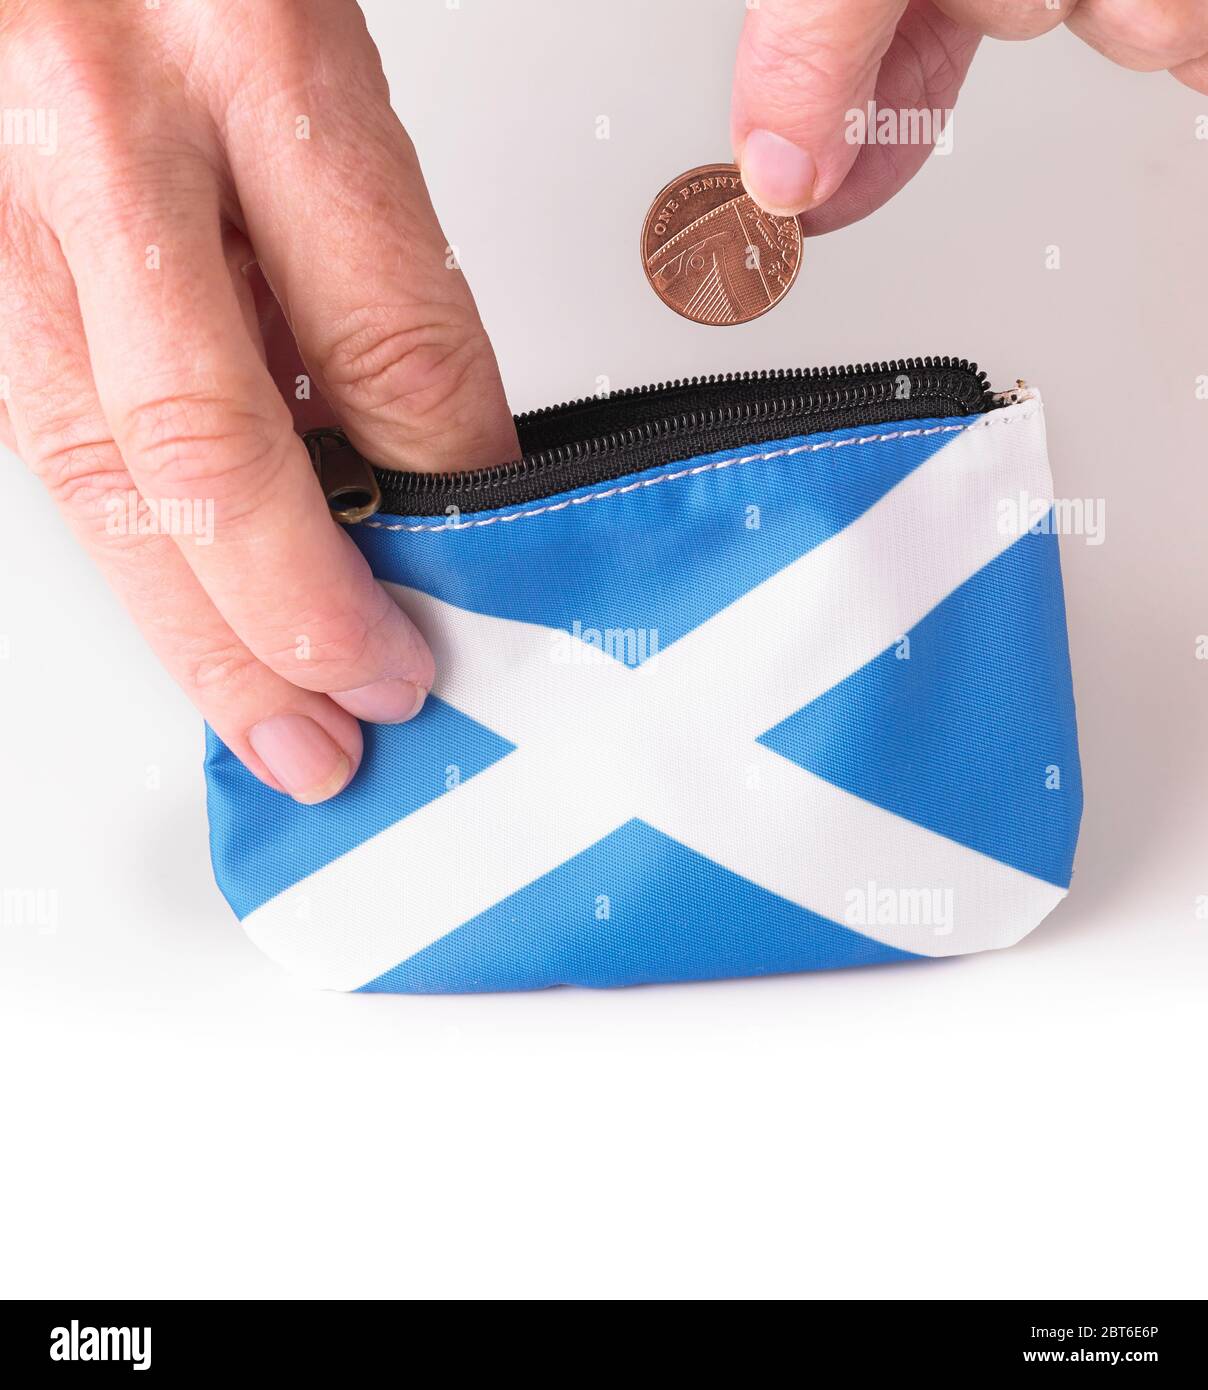 Hand placing British one penny coin into Scottish Saltire flag purse Stock Photo